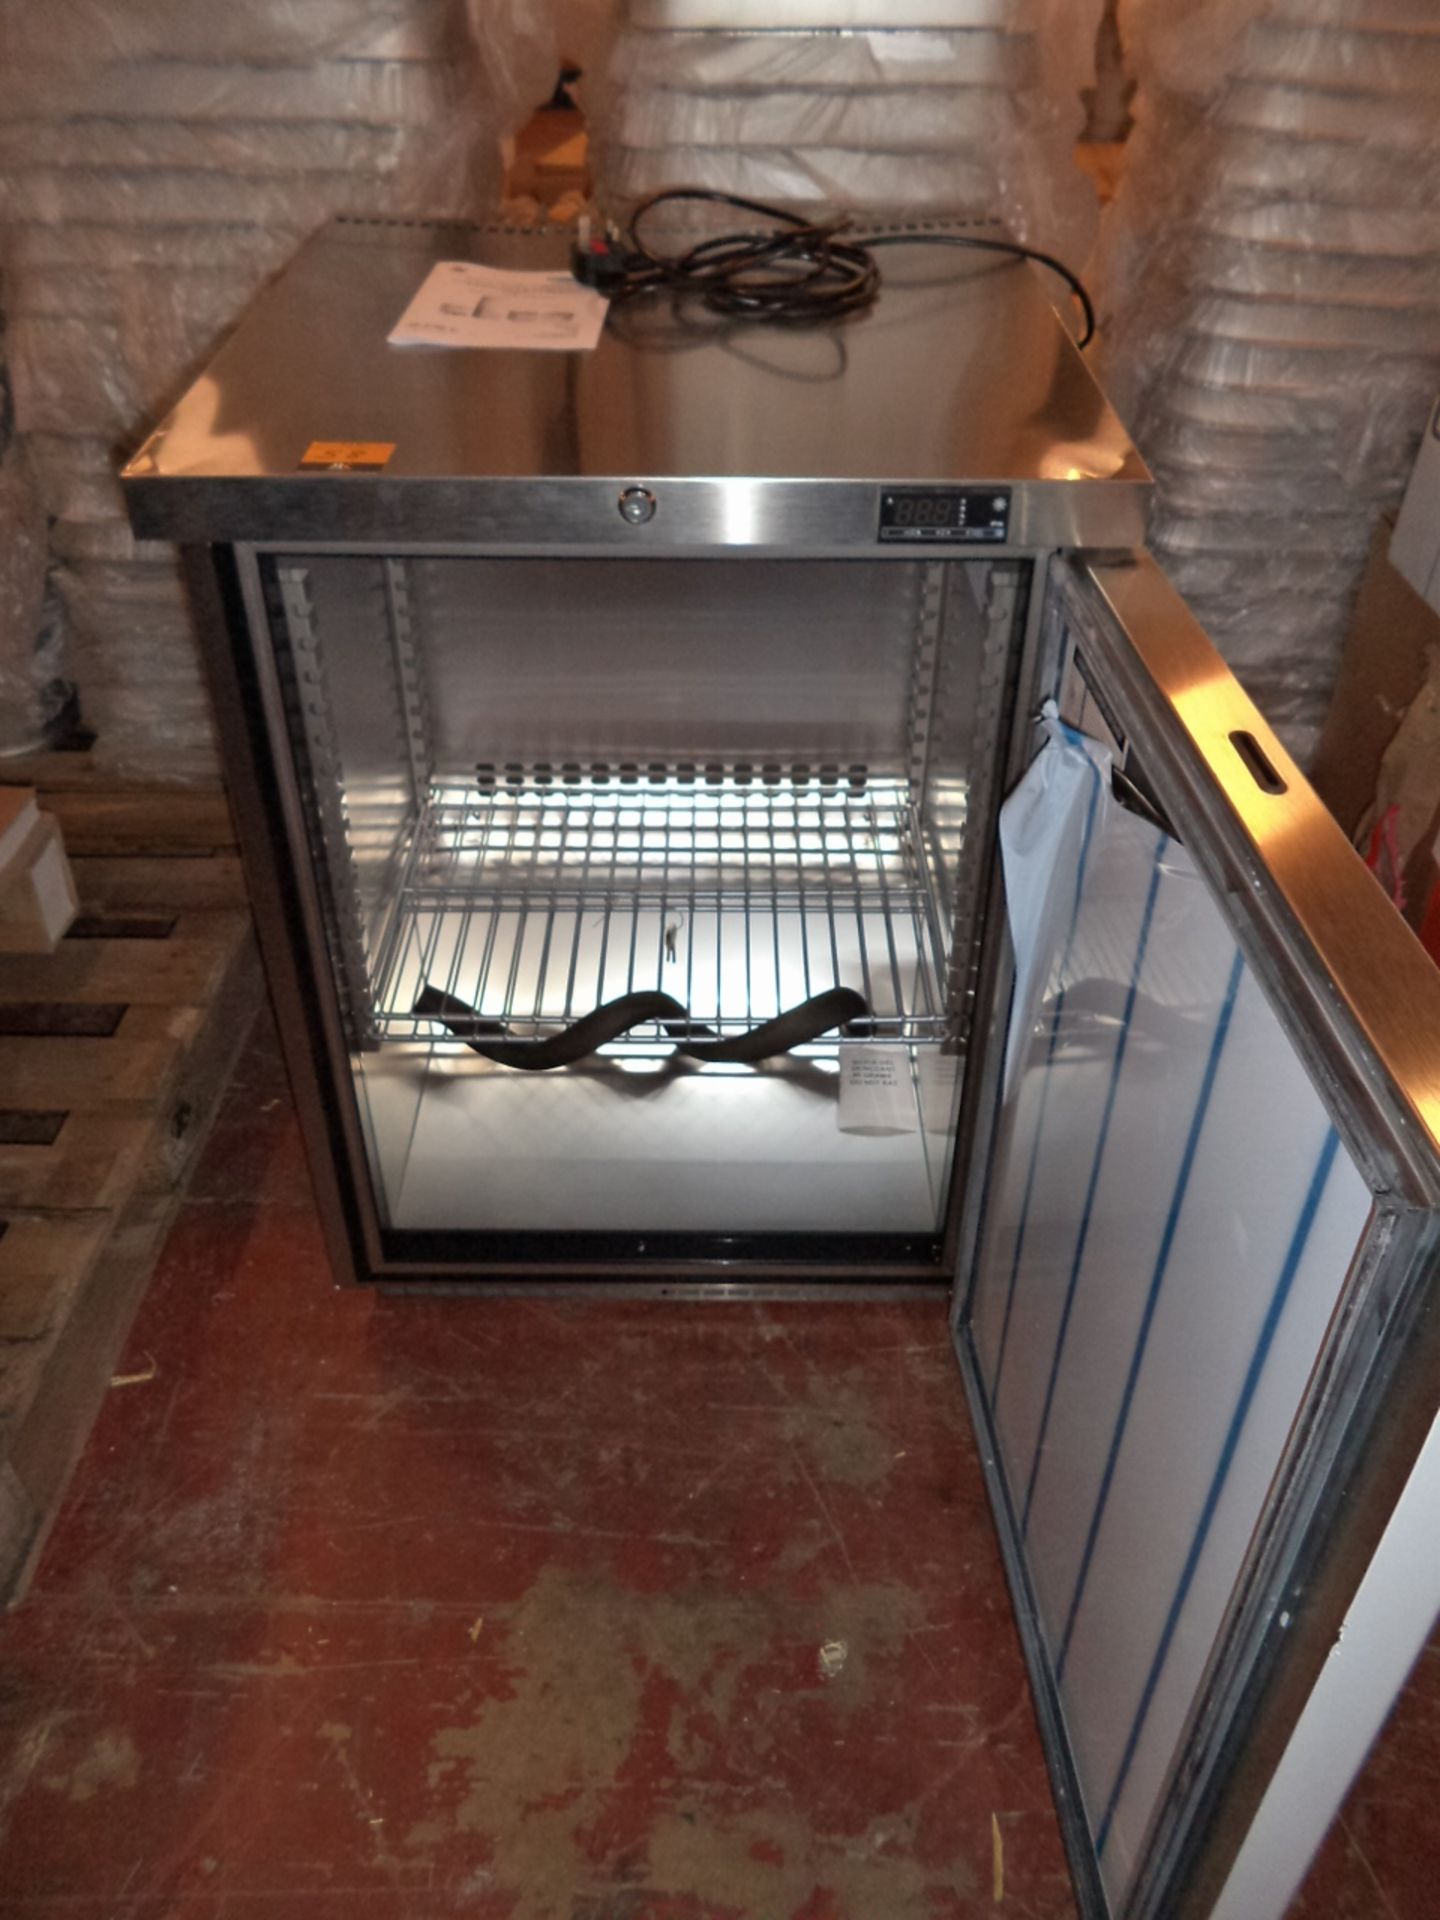 Foster stainless steel counter height fridge in stainless steel - Image 3 of 4